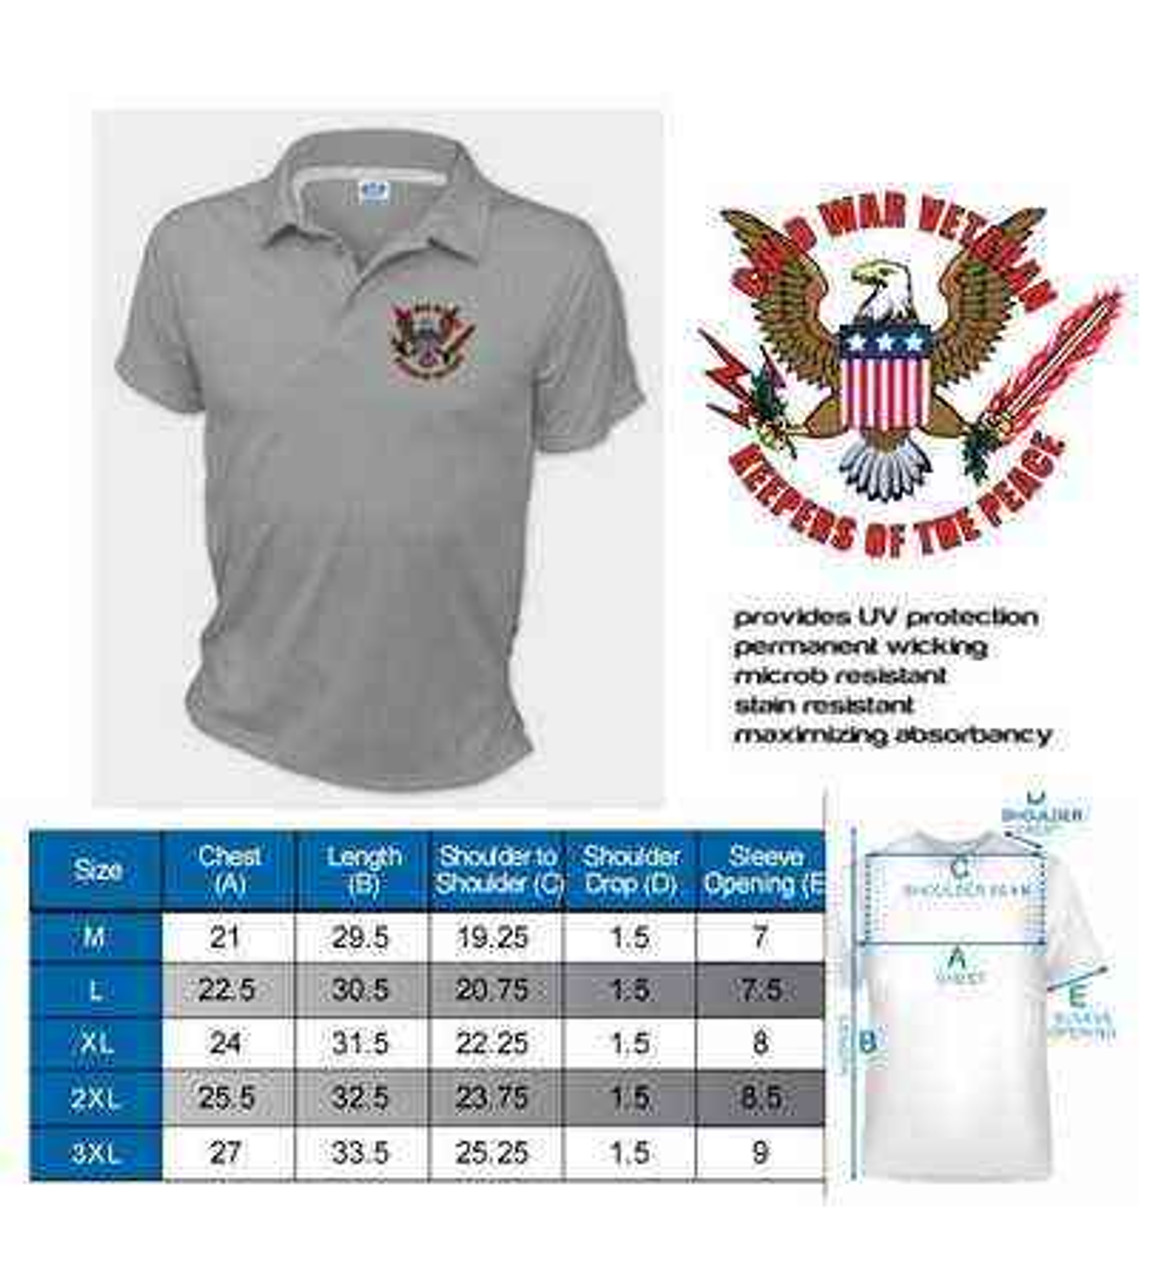 cold war veteran keepers peace grey performance polo